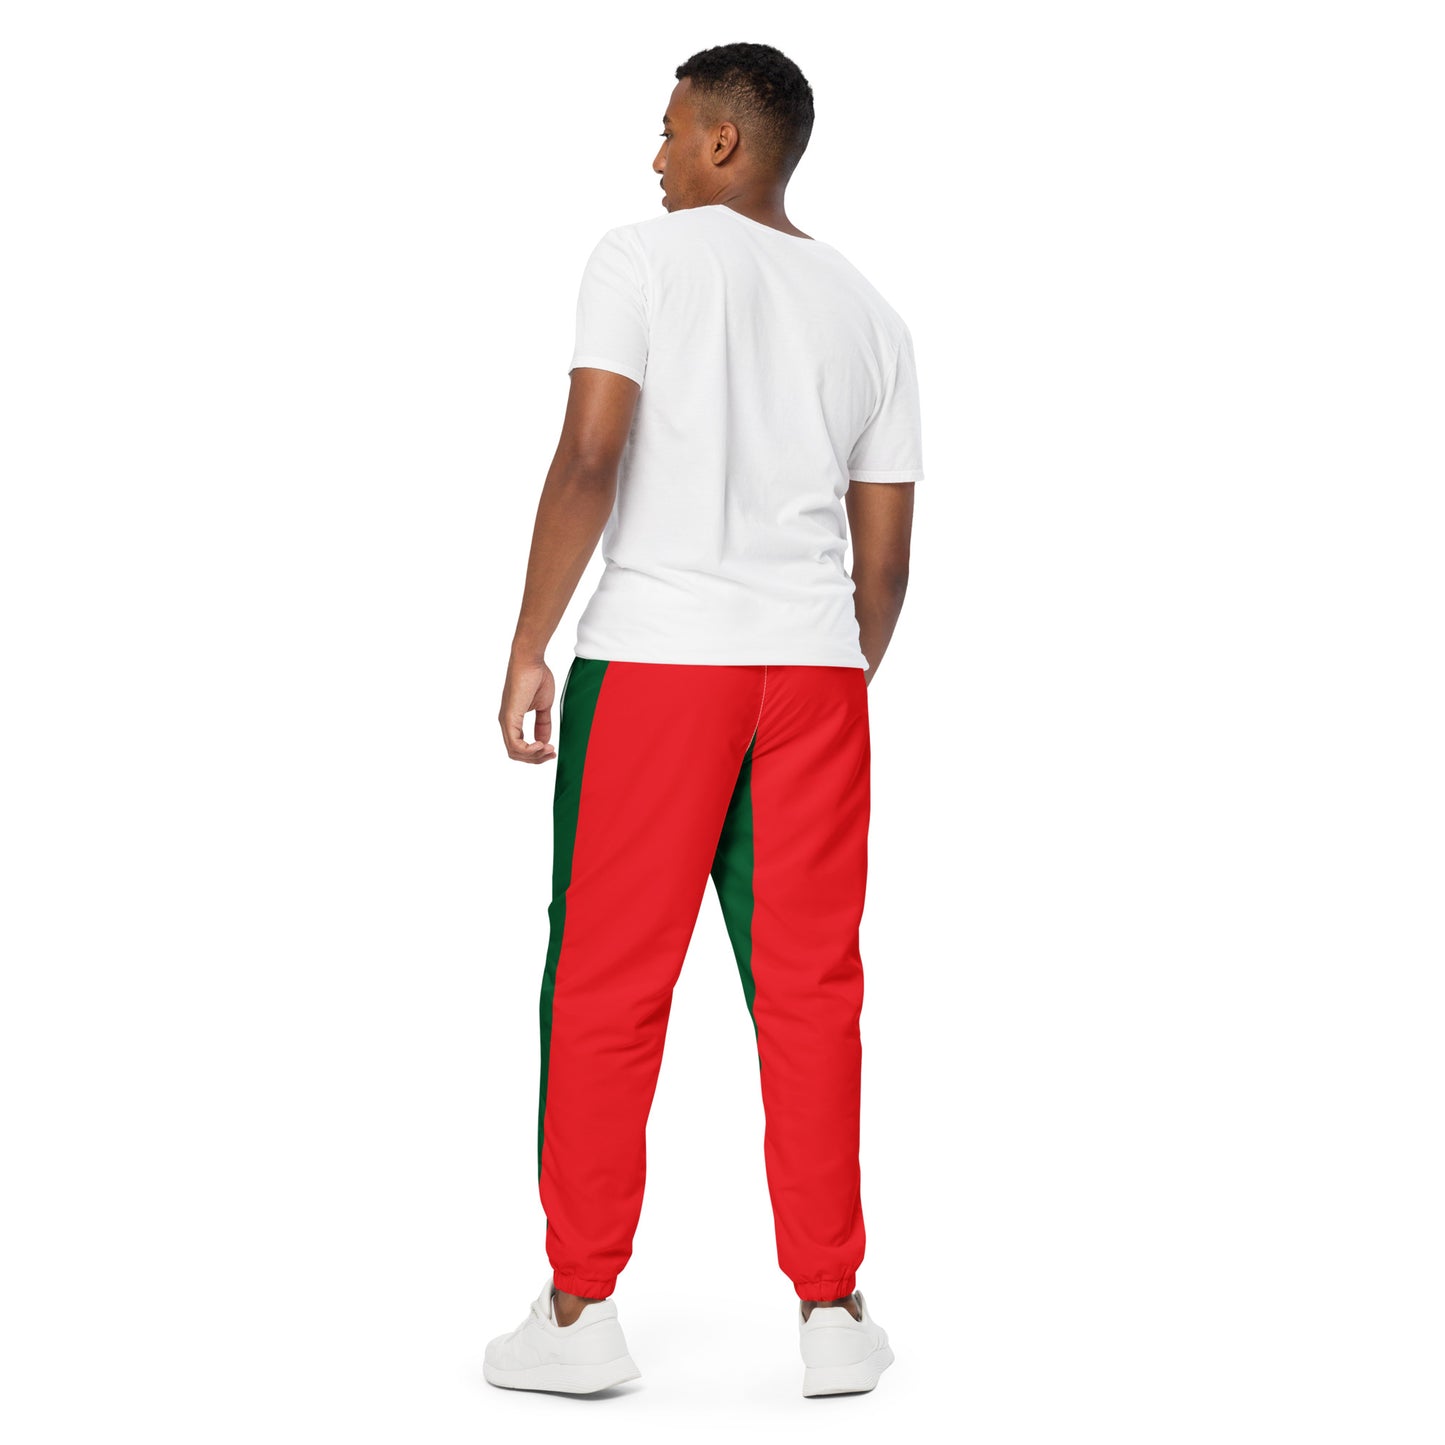 Swift Stripes - Inspired By Taylor Swift - Sustainably Made Unisex track pants